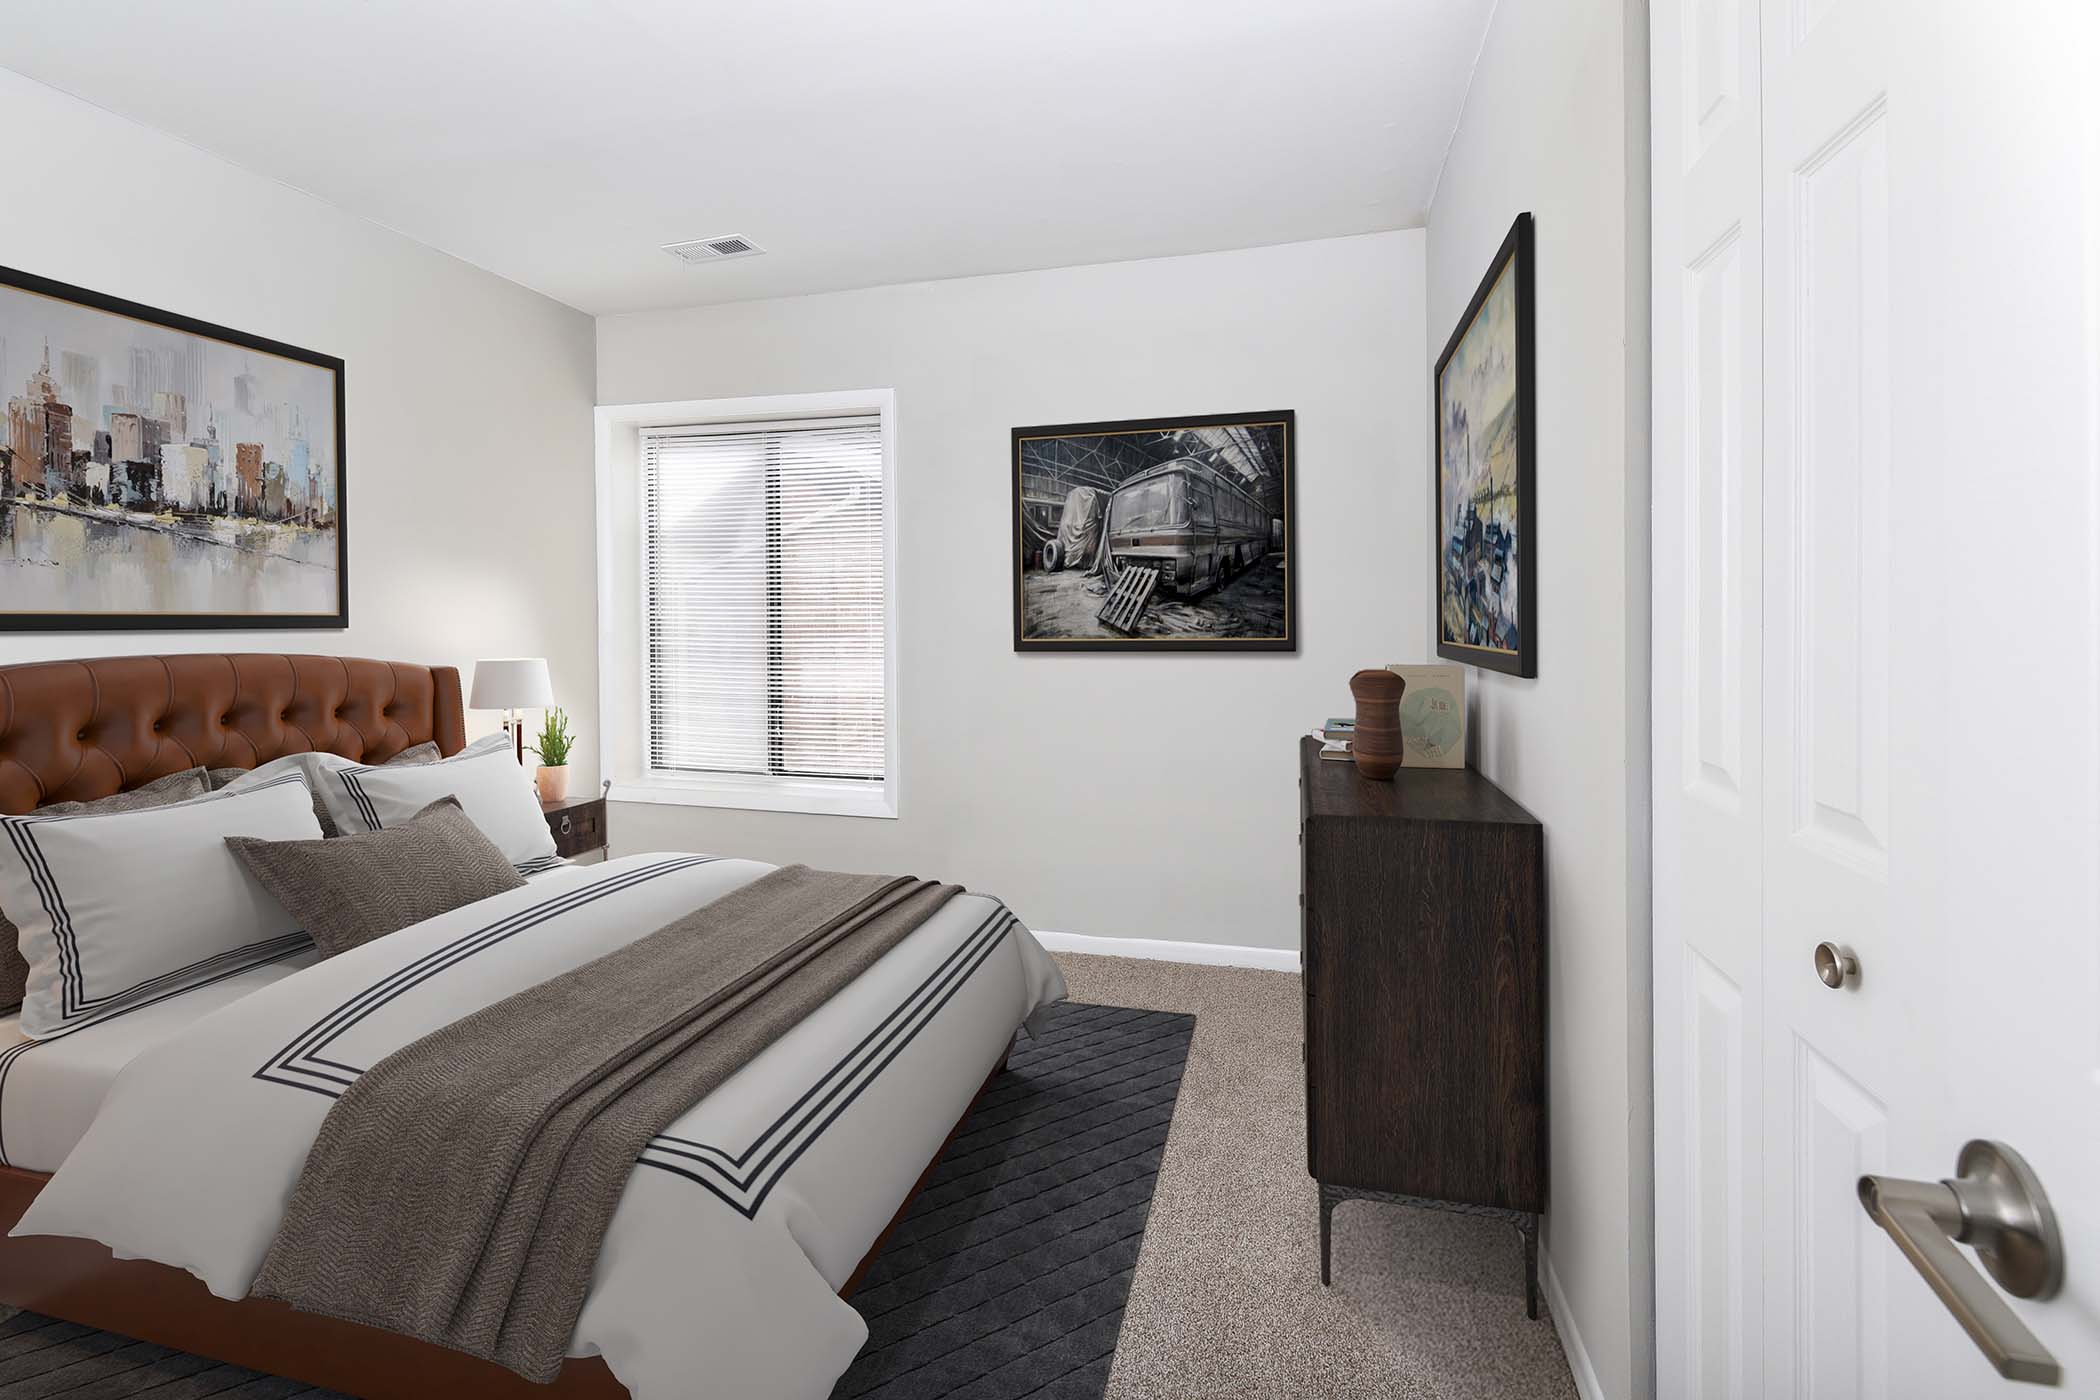 Second bedroom at The Flats at Columbia Pike, Silver Spring, Maryland